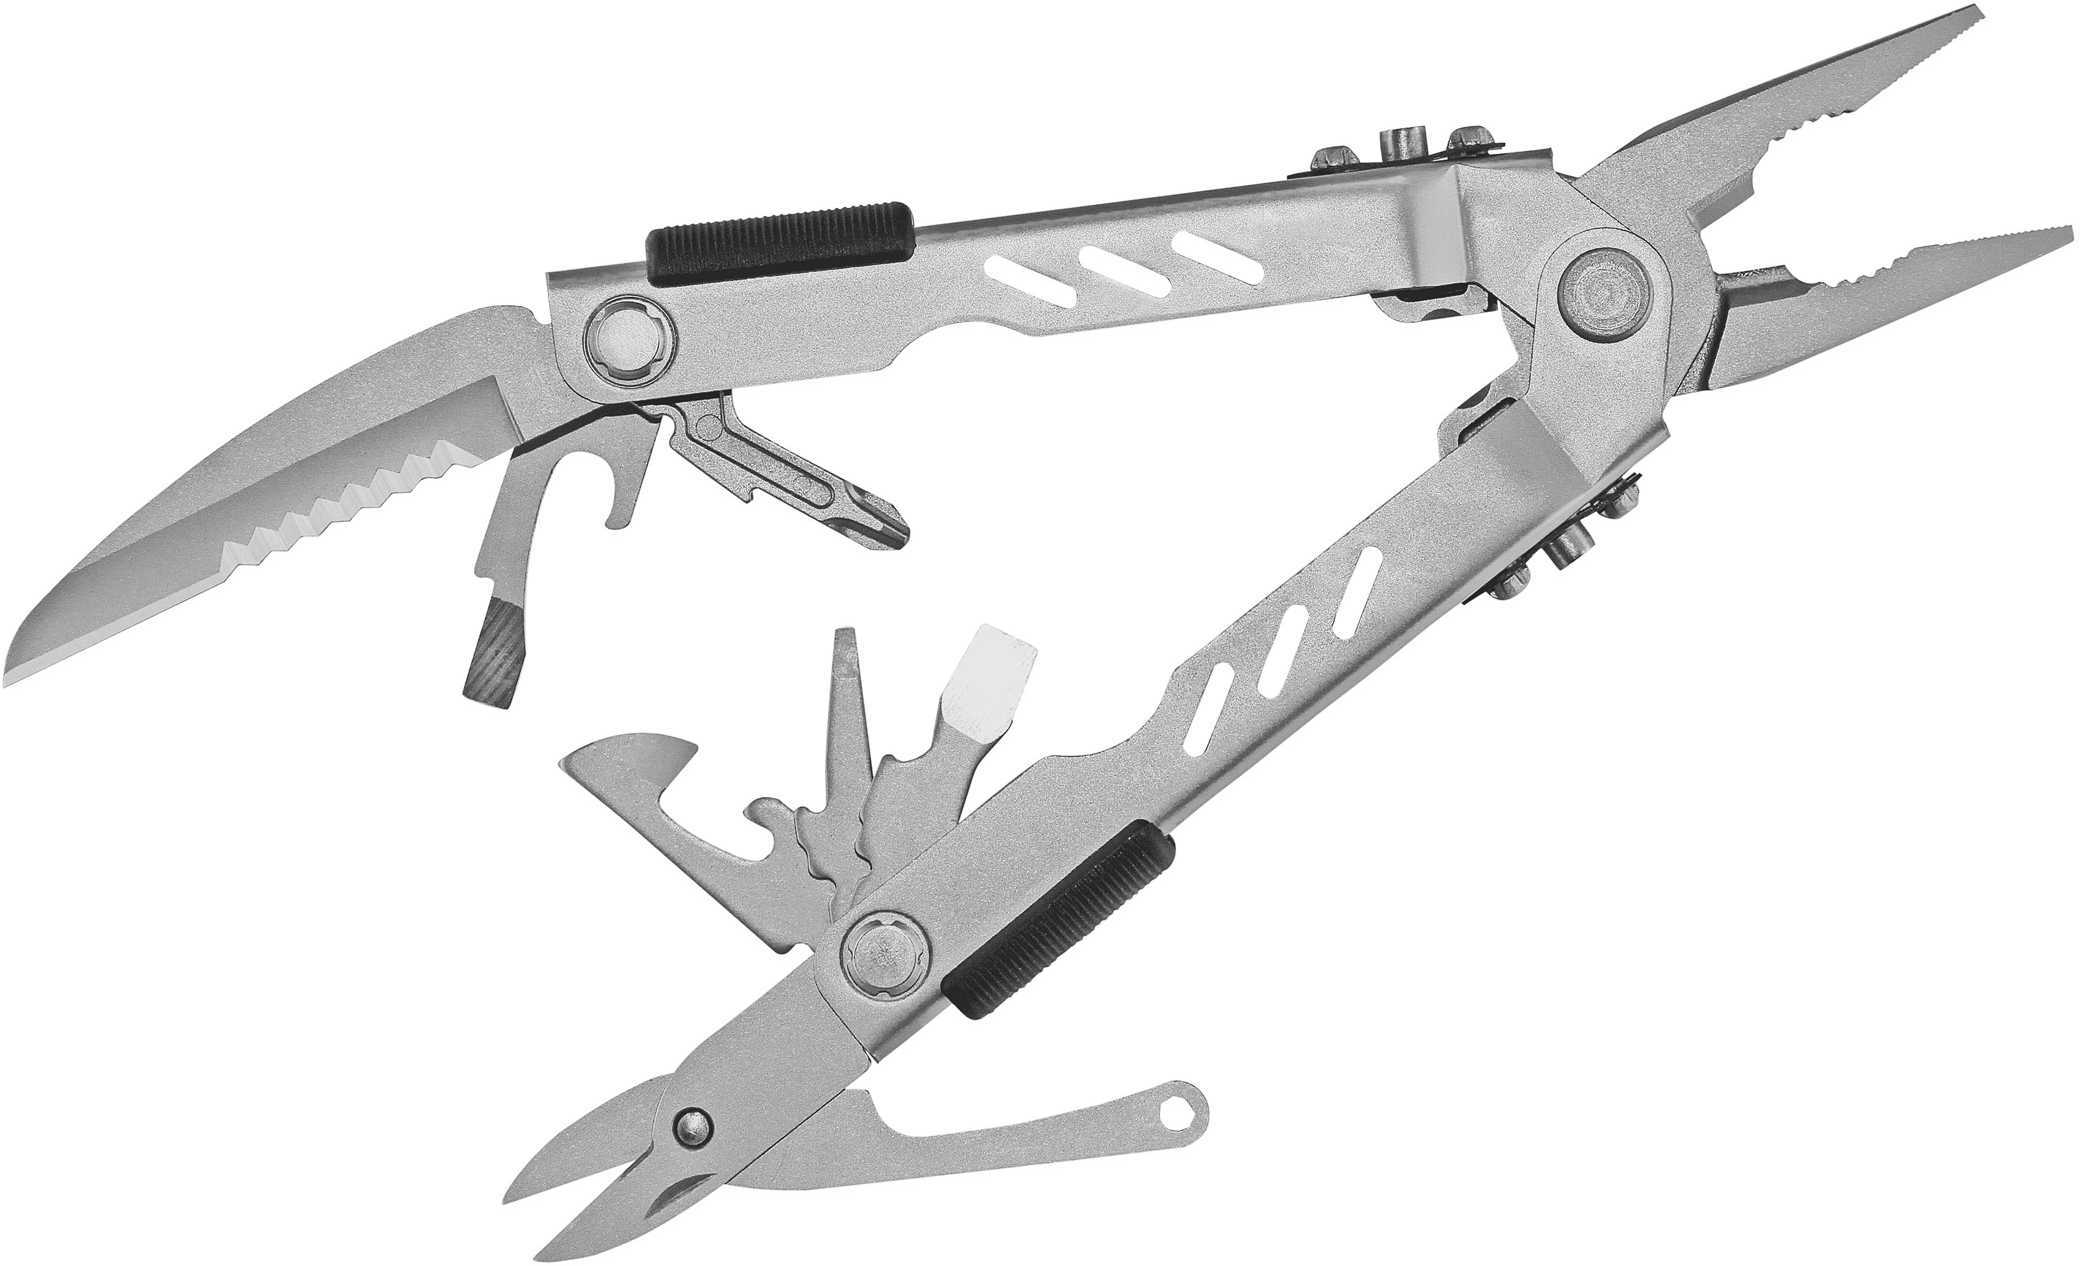 Gerber Blades Multi-Plier 400, Compact Sport (Clam Packed) 45500